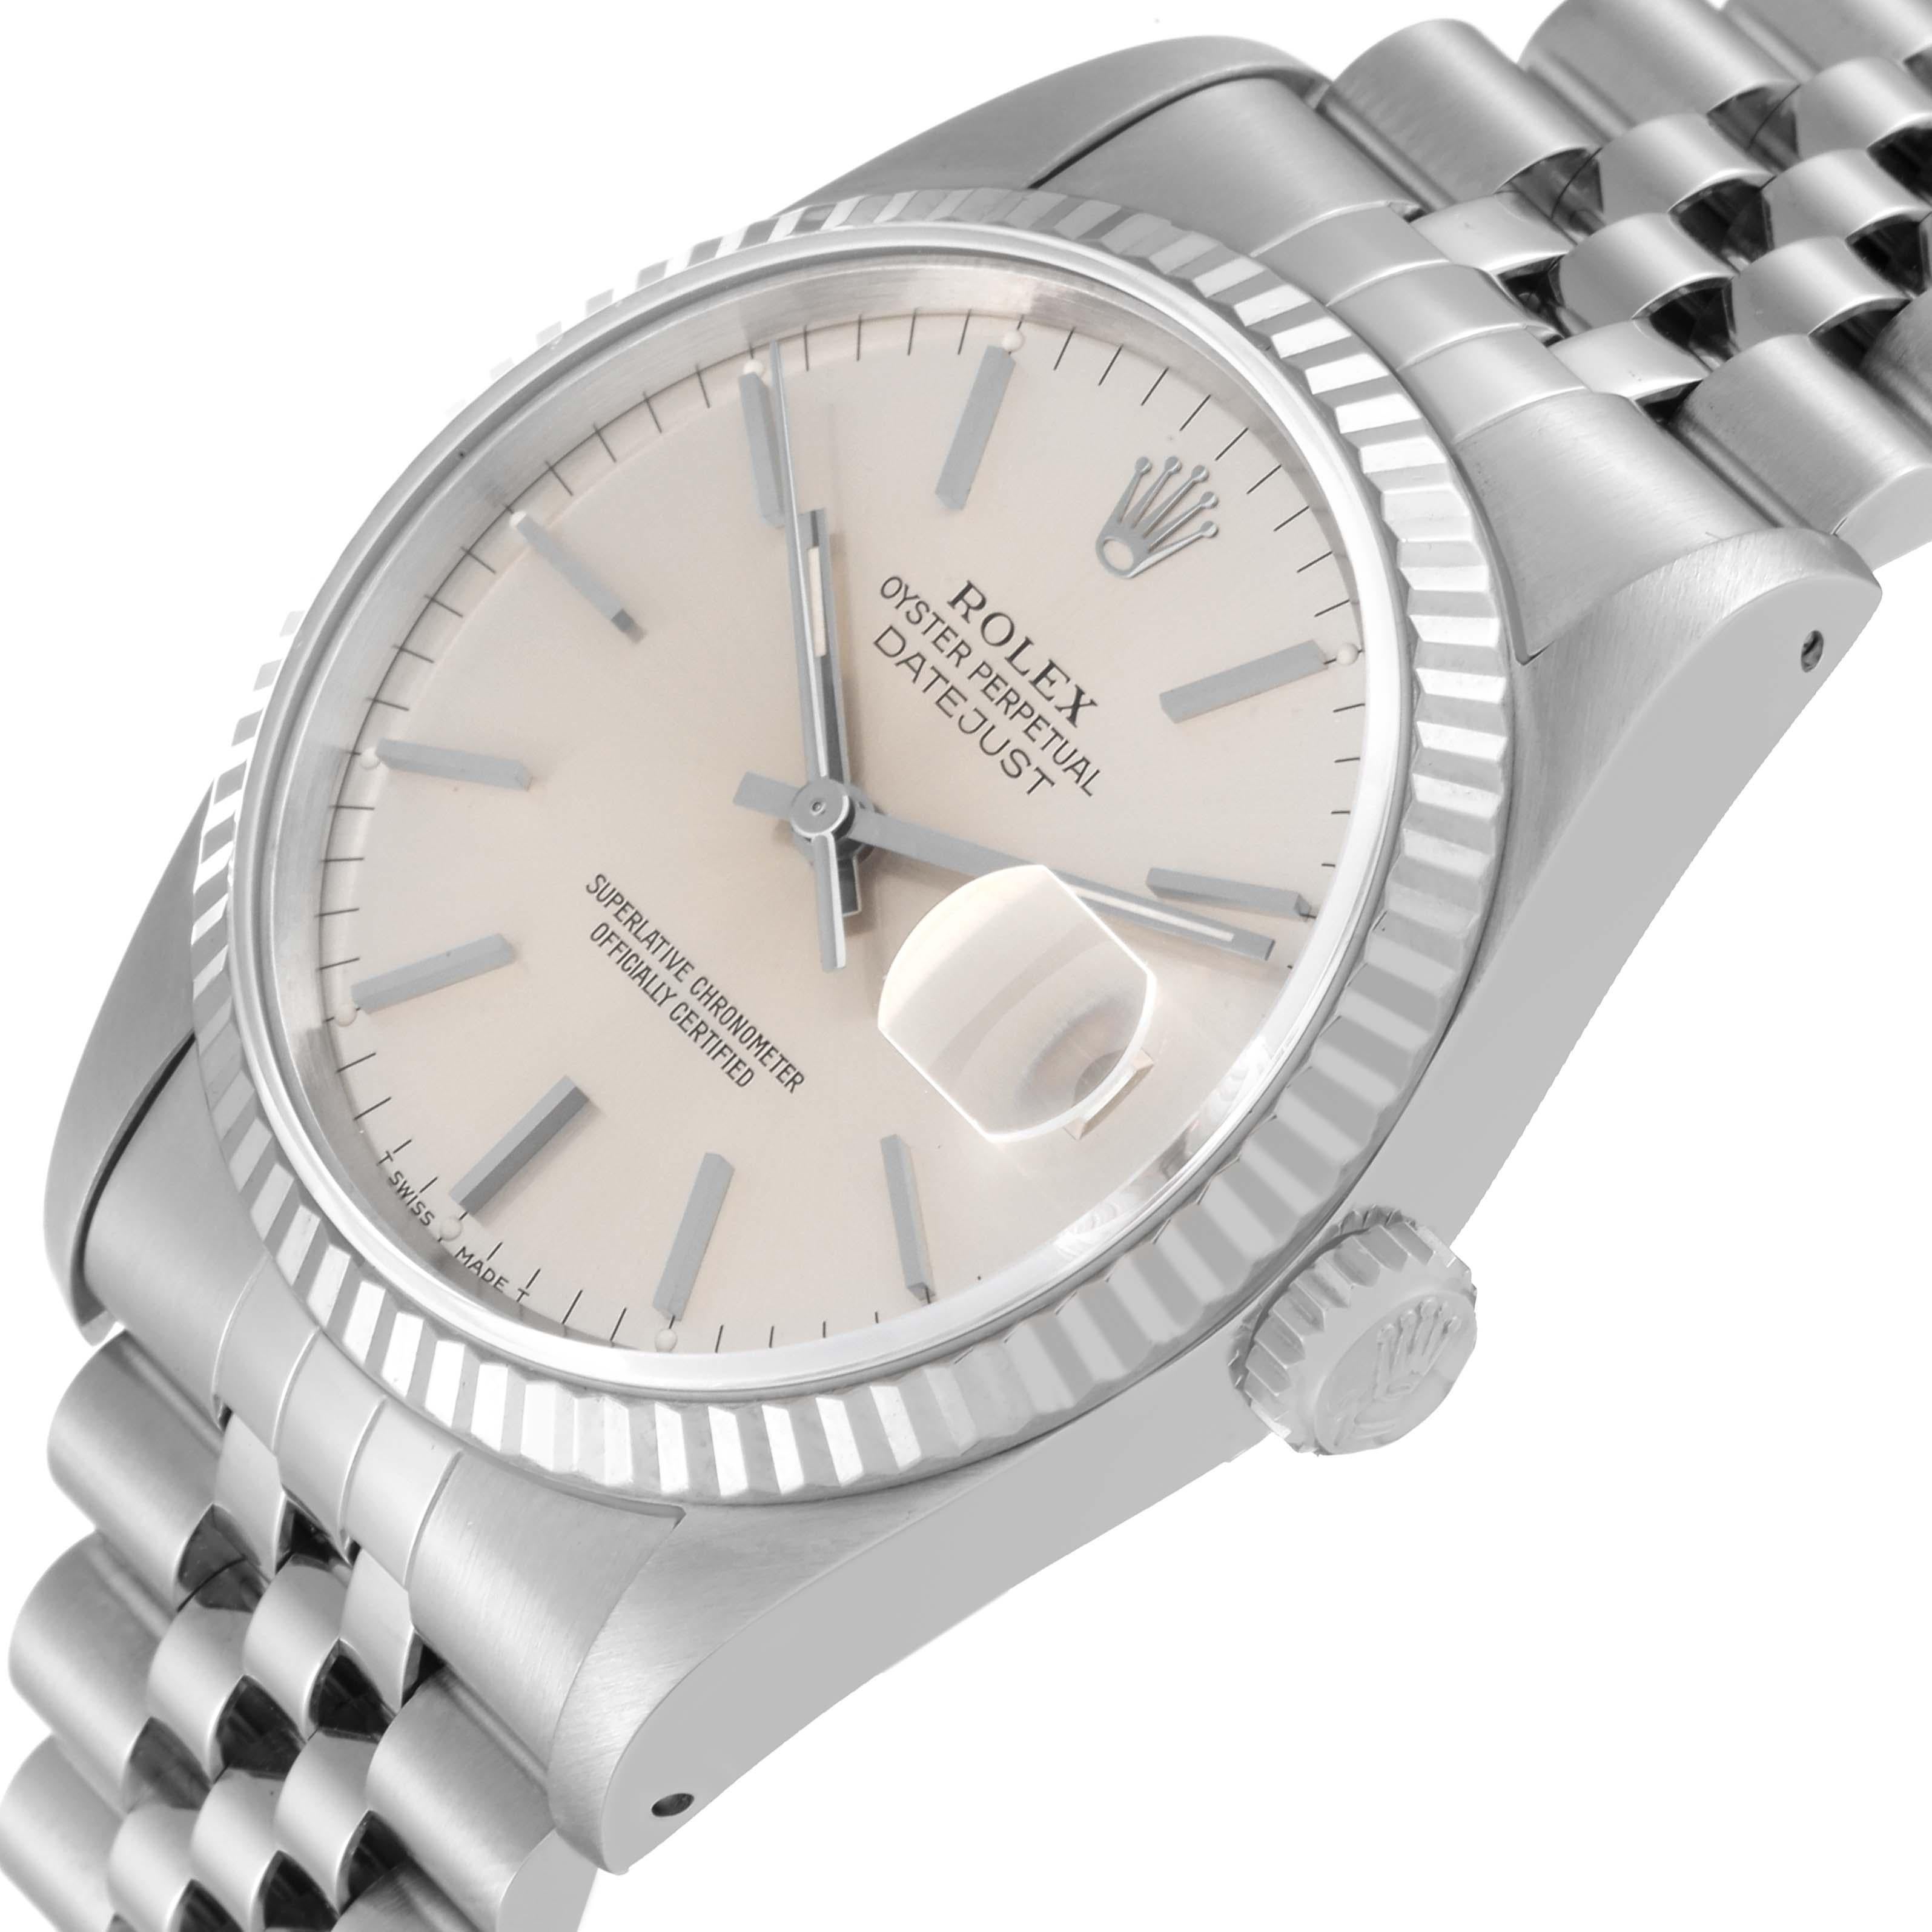 Rolex Datejust Steel White Gold Silver Dial Mens Watch 16234 1